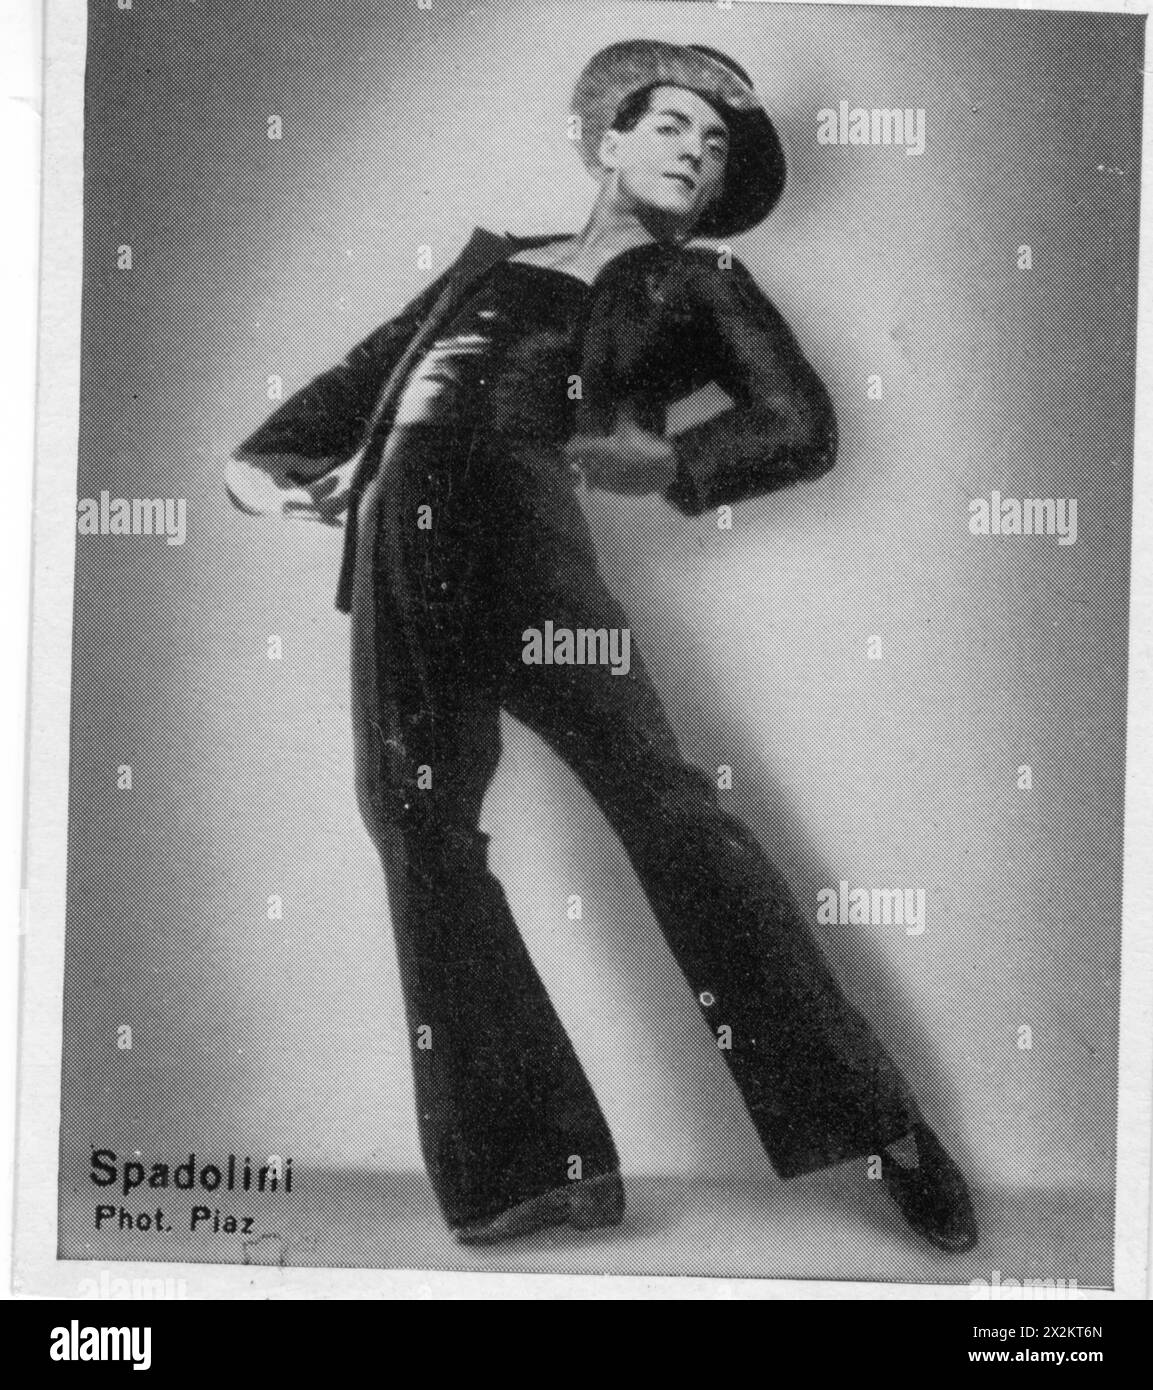 Spadolini, Alberto, 1907 - 17.12.1972, Italian dancer, print based on photograph, circa 1930, ADDITIONAL-RIGHTS-CLEARANCE-INFO-NOT-AVAILABLE Stock Photo